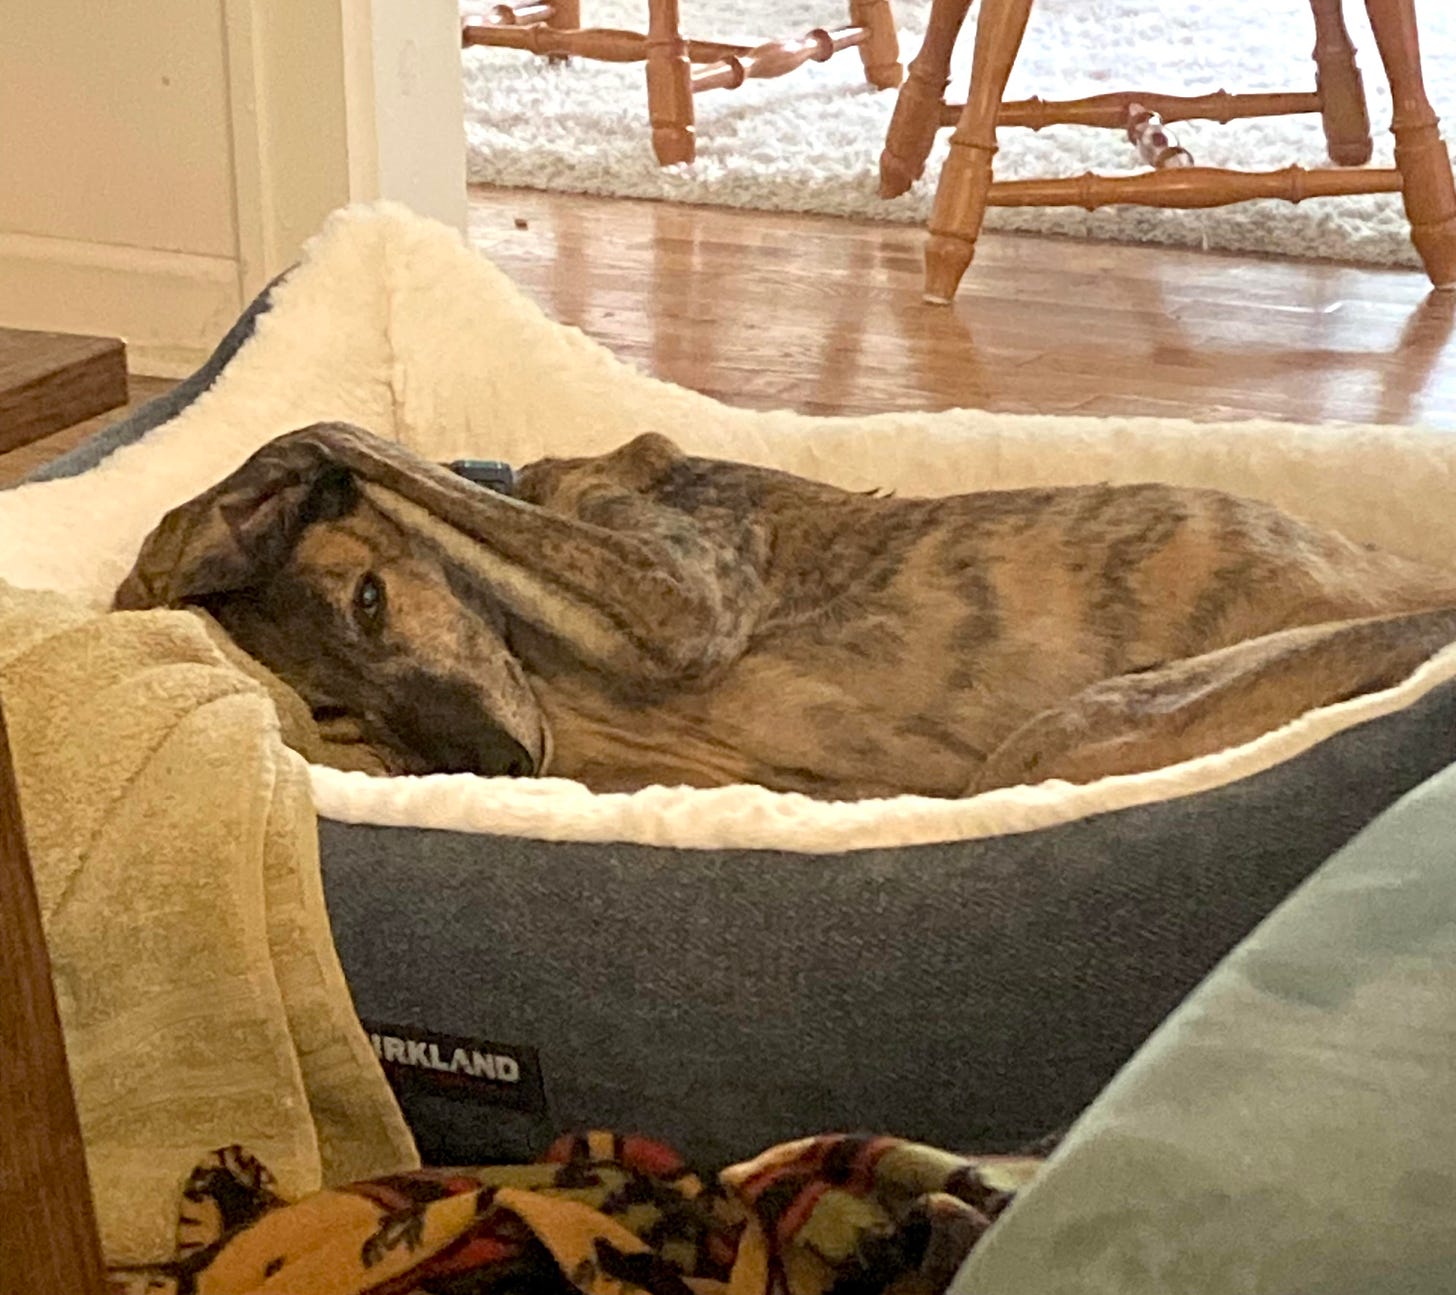 A brindle greyhound covering his ears in a Kirkland bed.